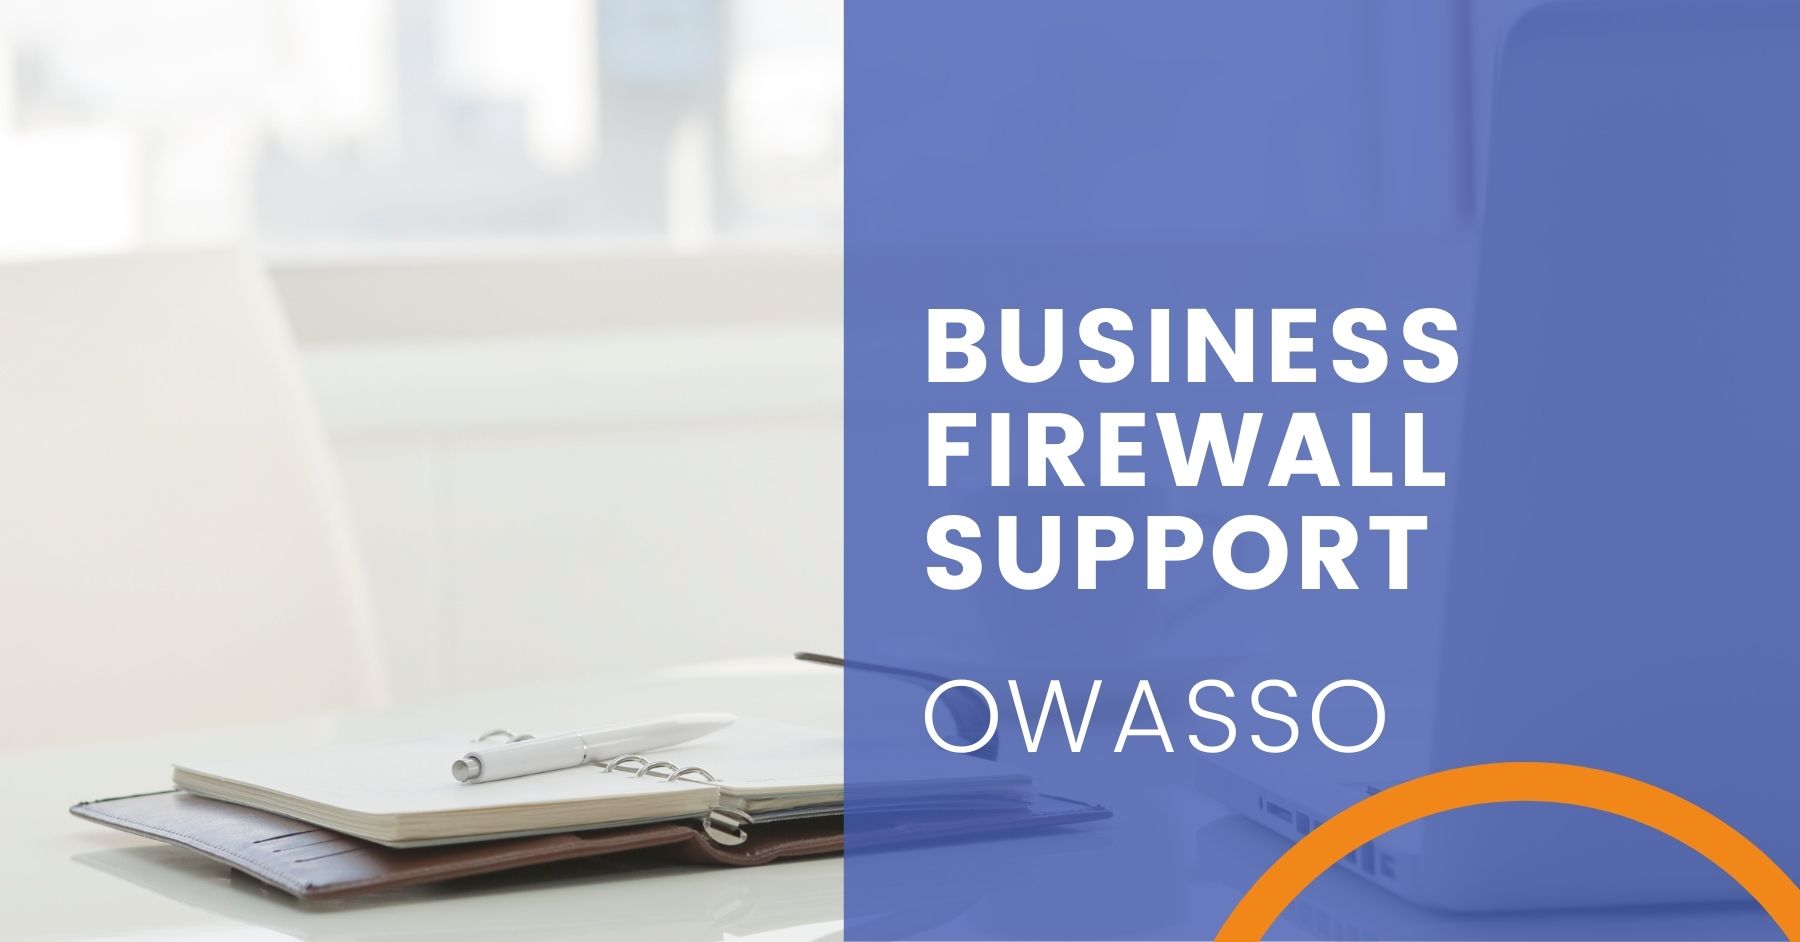 Business Firewall Support in Owasso, Oklahoma